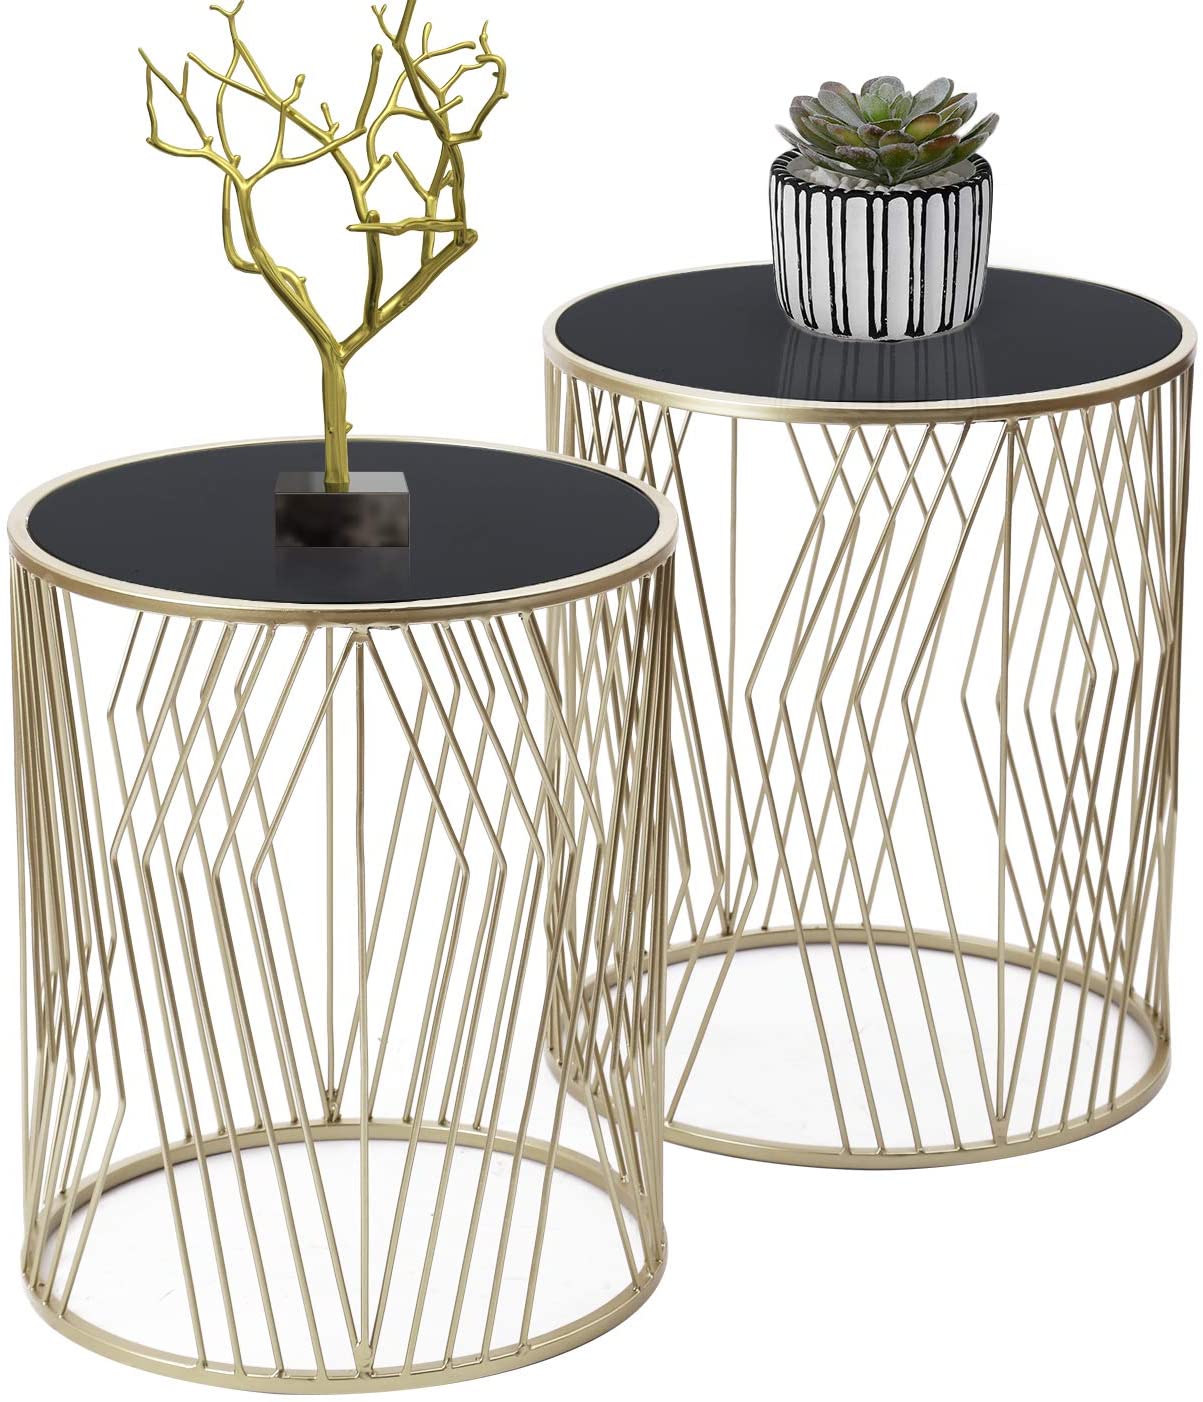 Nest Of Table 2 Pieces End Table Metal Side Tables for Living Room (Black Top Silver)